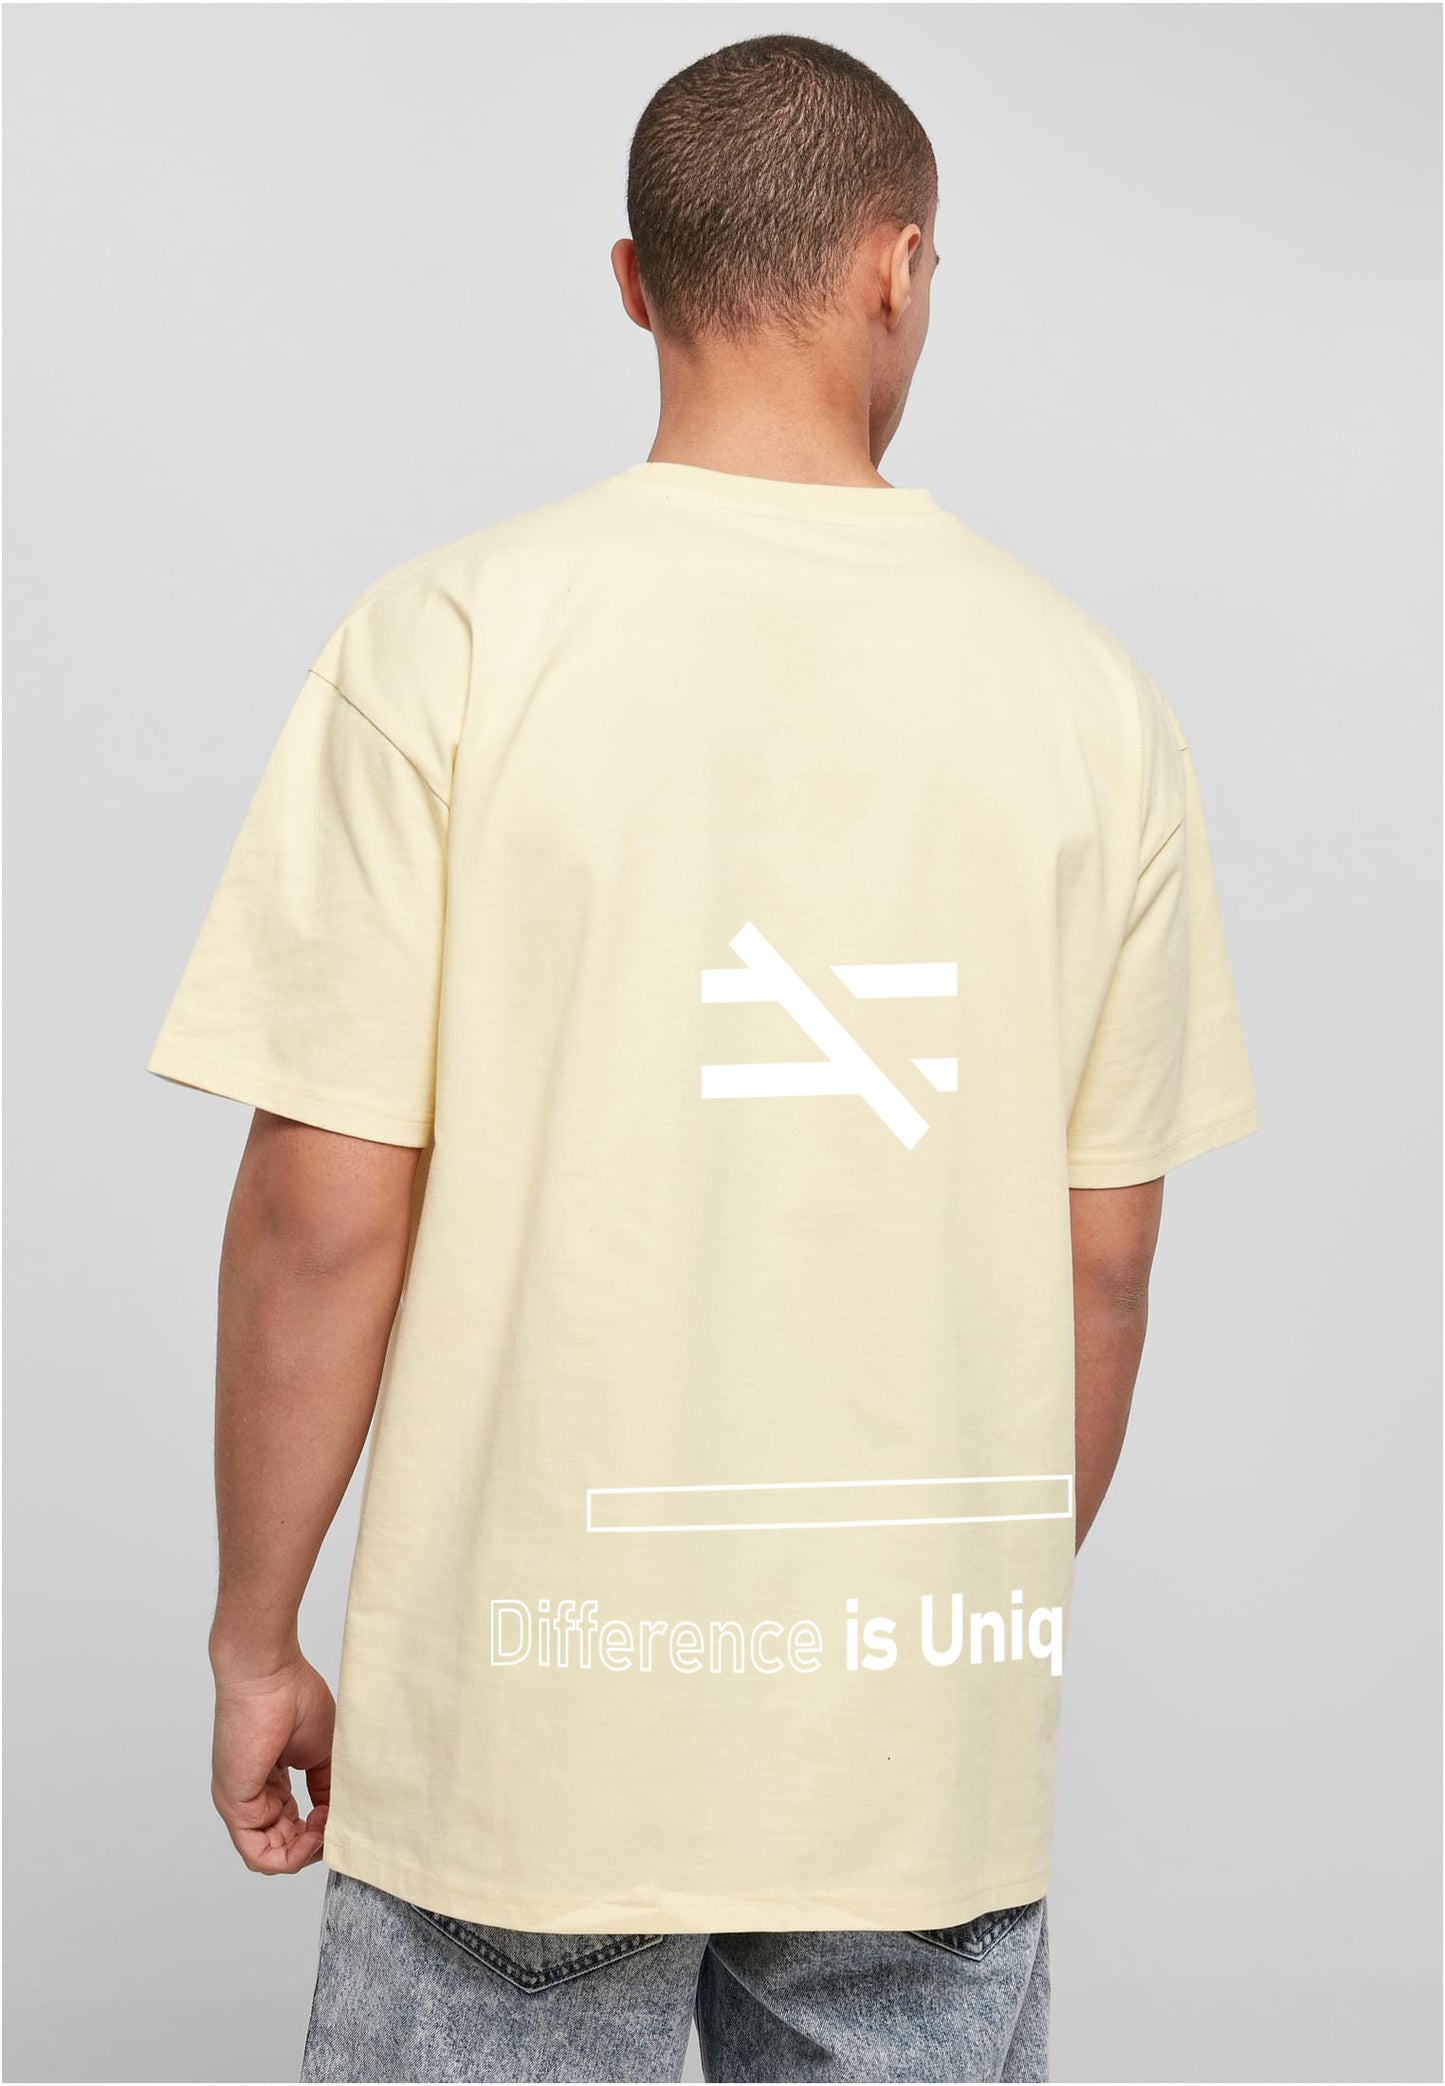 Tee-shirt - Difference is Unique - Jaune doux